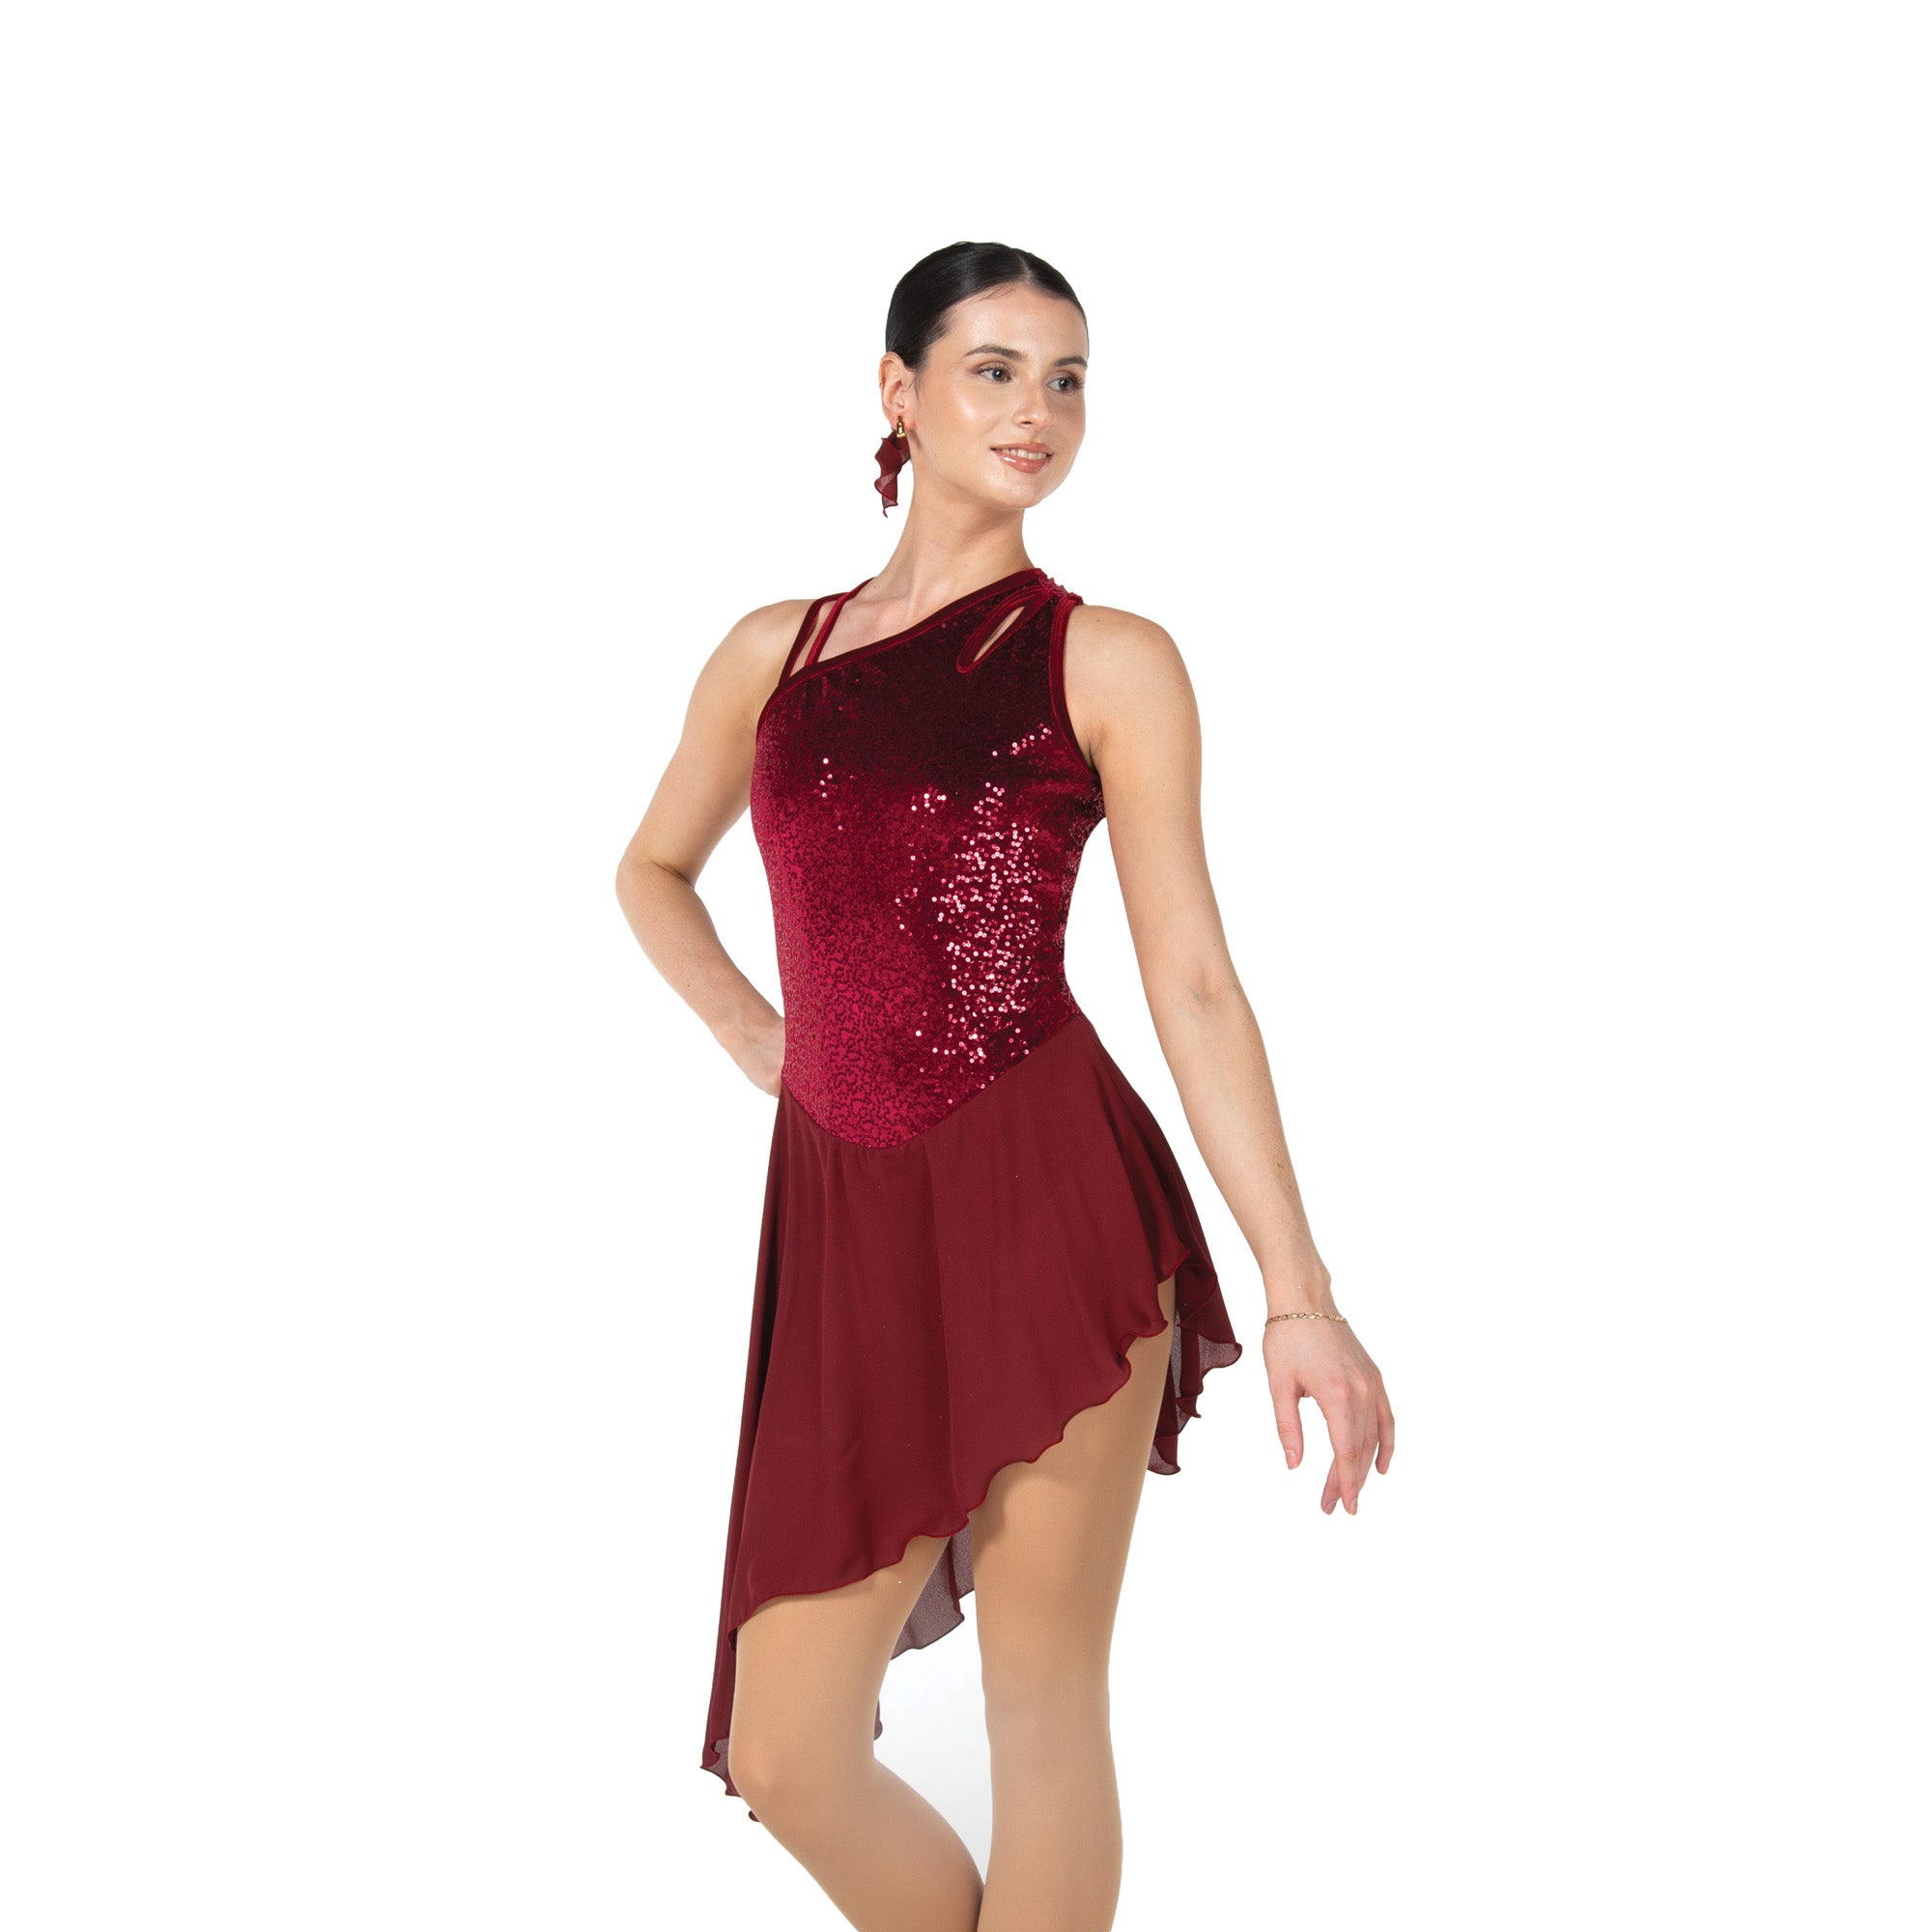 106 Sequin Chasse Dance Dress in wine by Jerry's